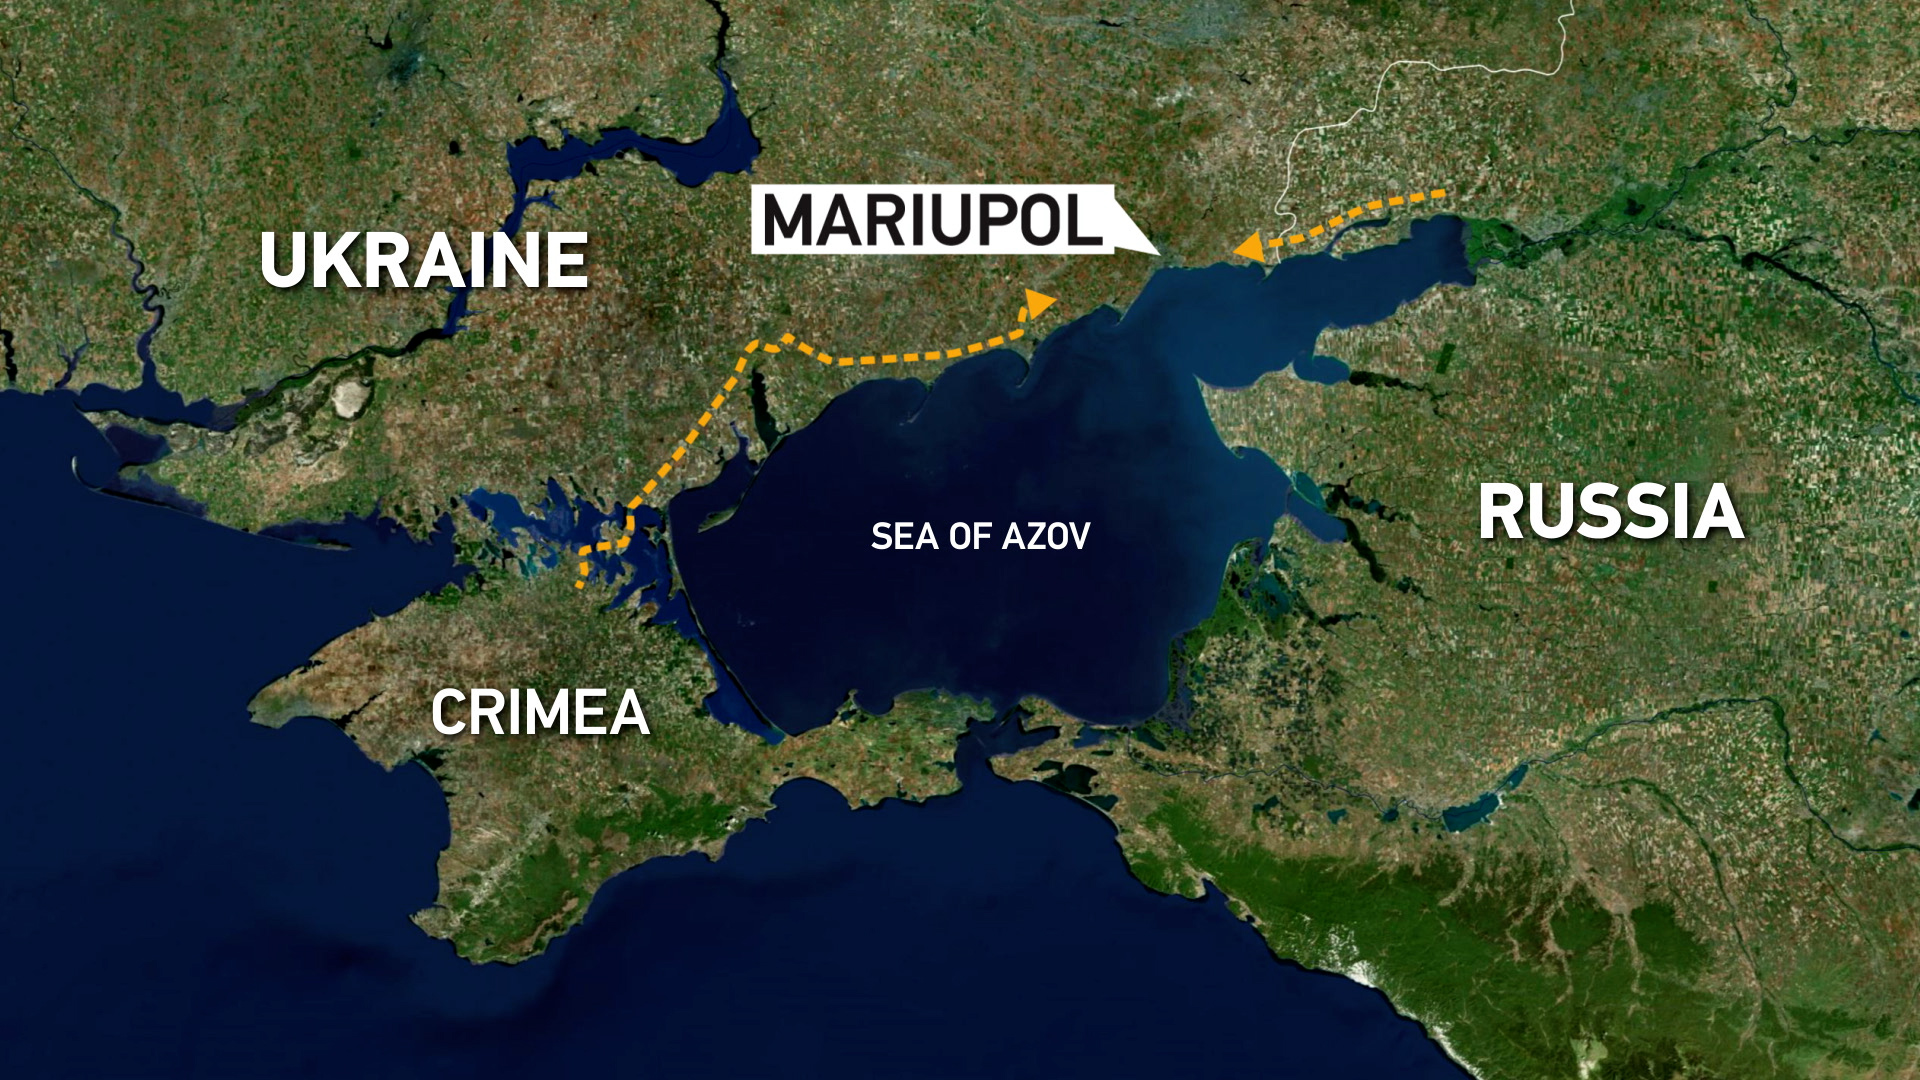 Ukraine's port city of Mariupol remains at risk from Russian invasion - CGTN